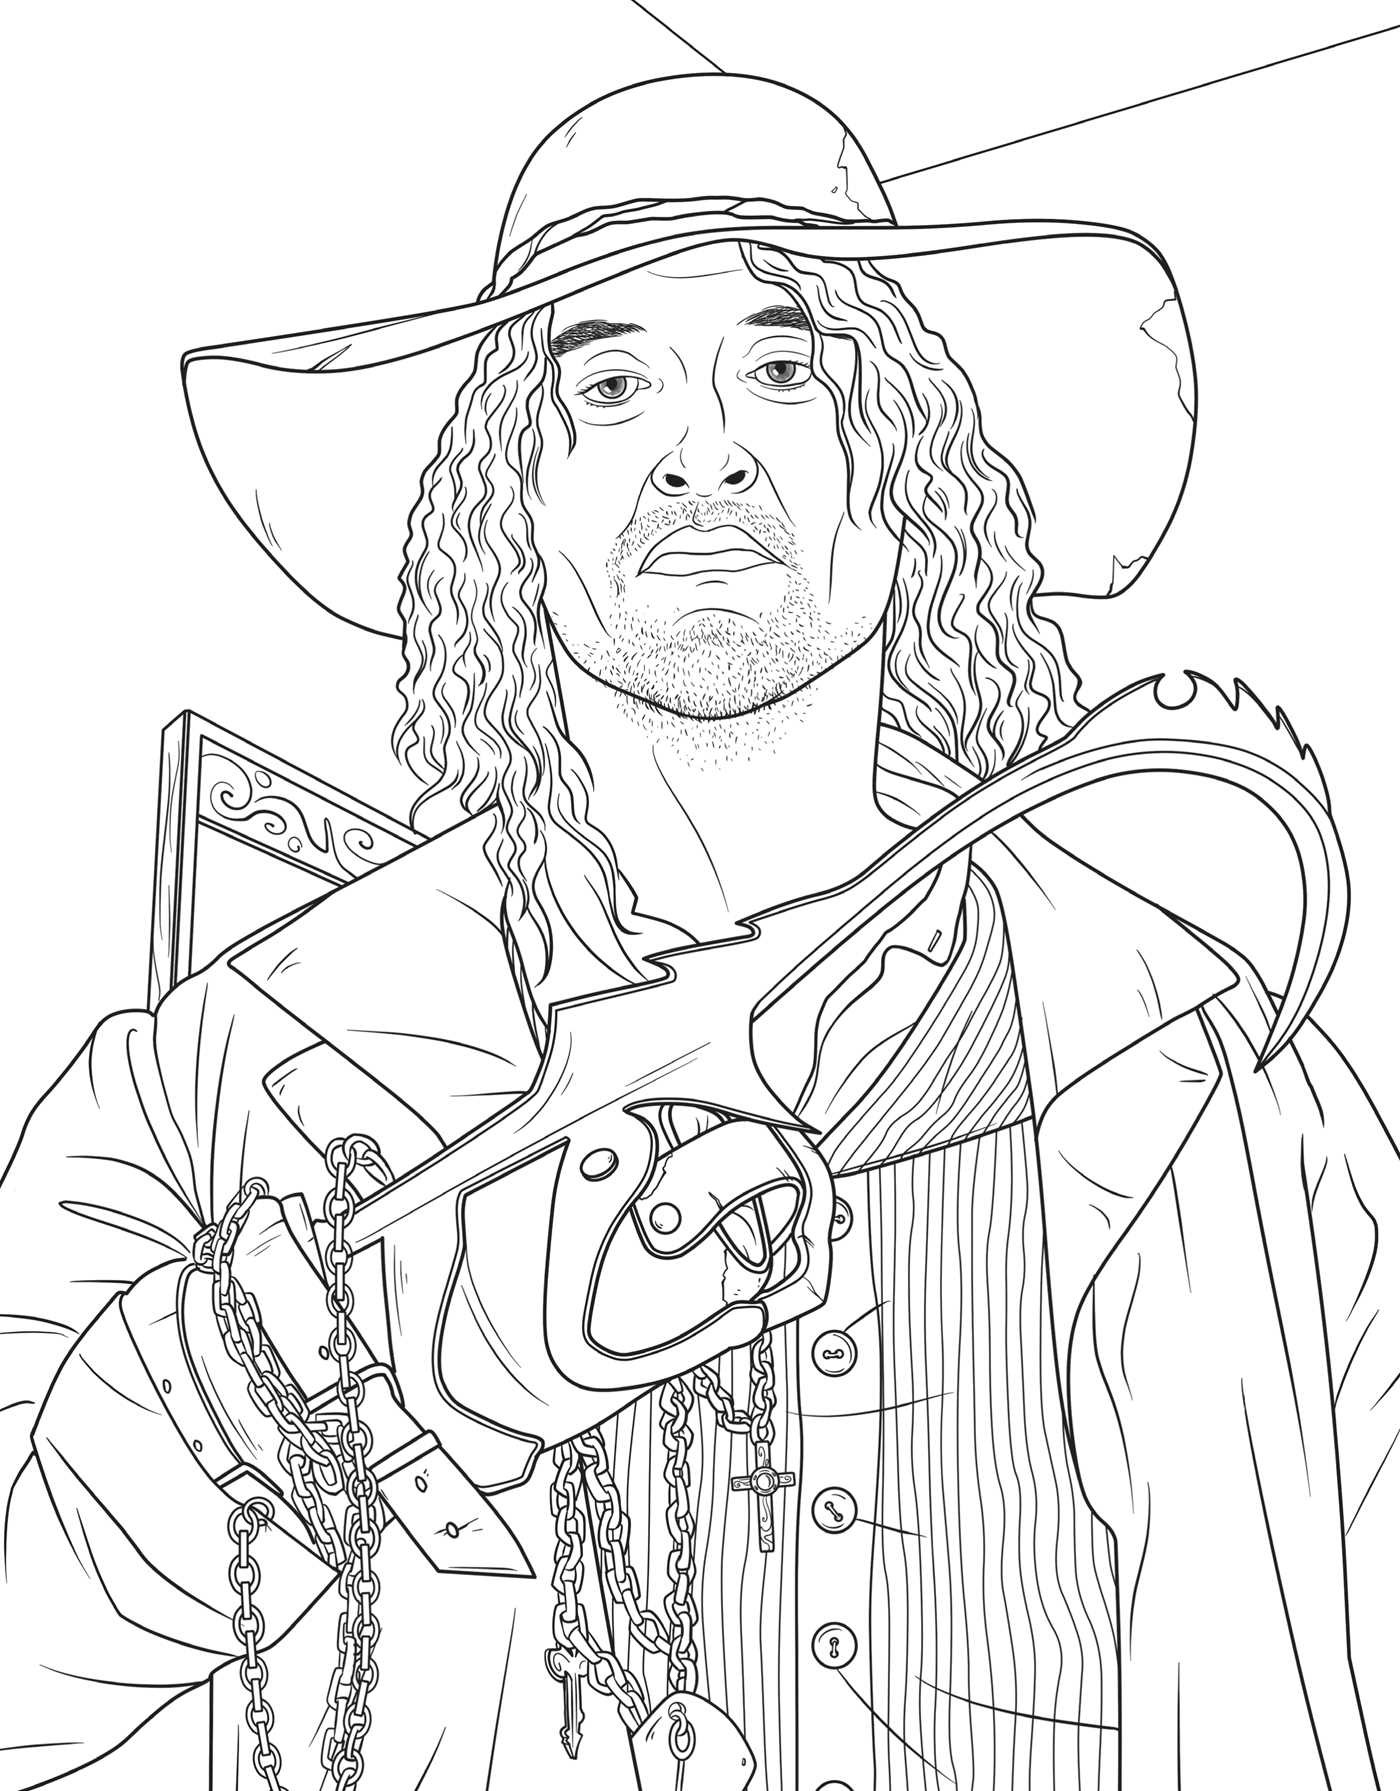 supernatural coloring pages in the coloring book